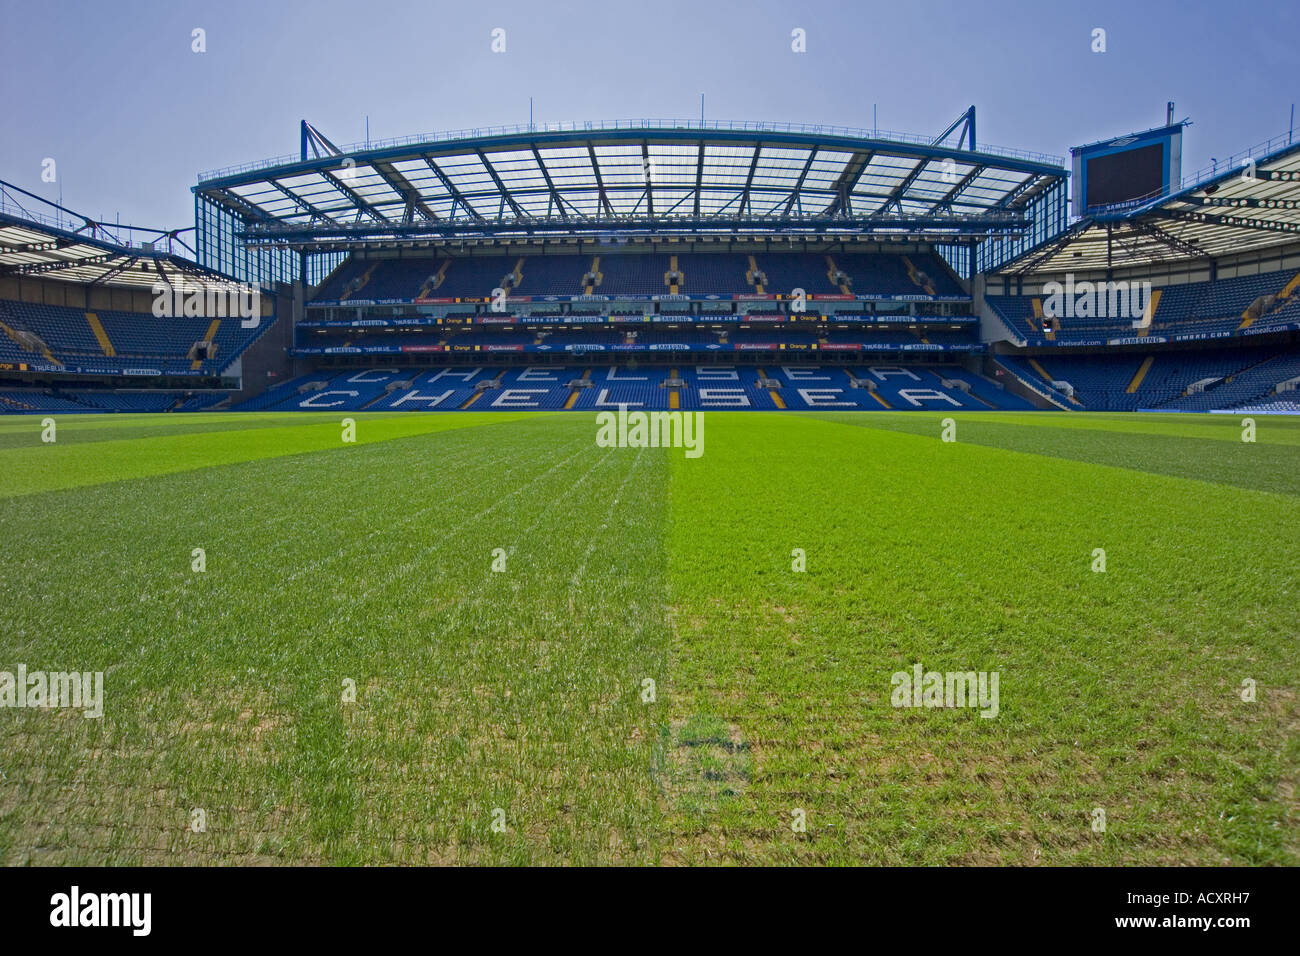 Chelsea Football Club stand Foto Stock